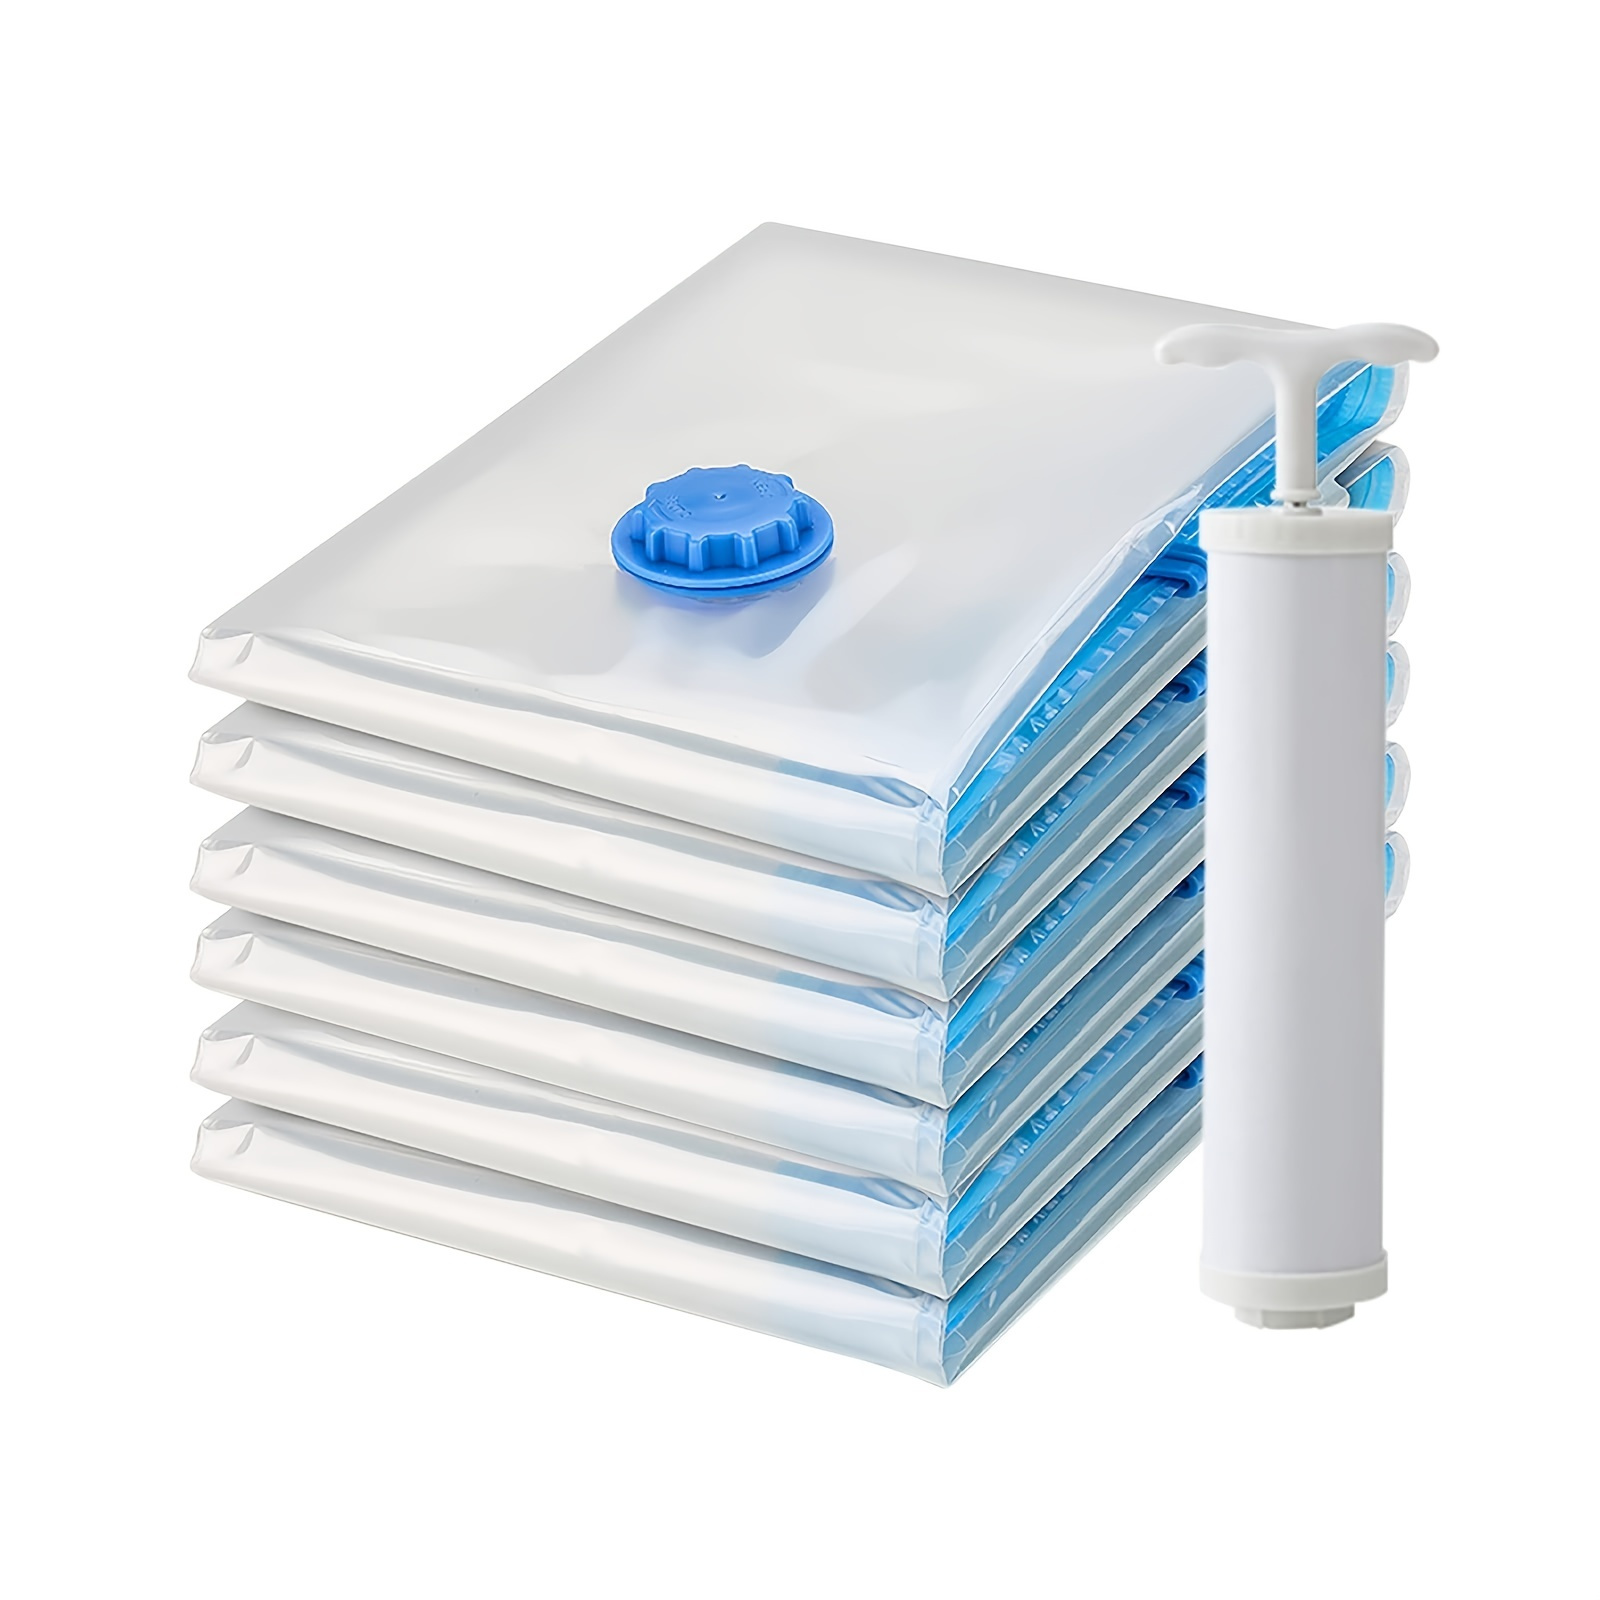 Spacesaver Vacuum Storage Bags (Medium 6 Pack) Save 80% on Clothes Storage  Space - Vacuum Sealer Bags for Comforters, Blankets, Bedding, Clothing